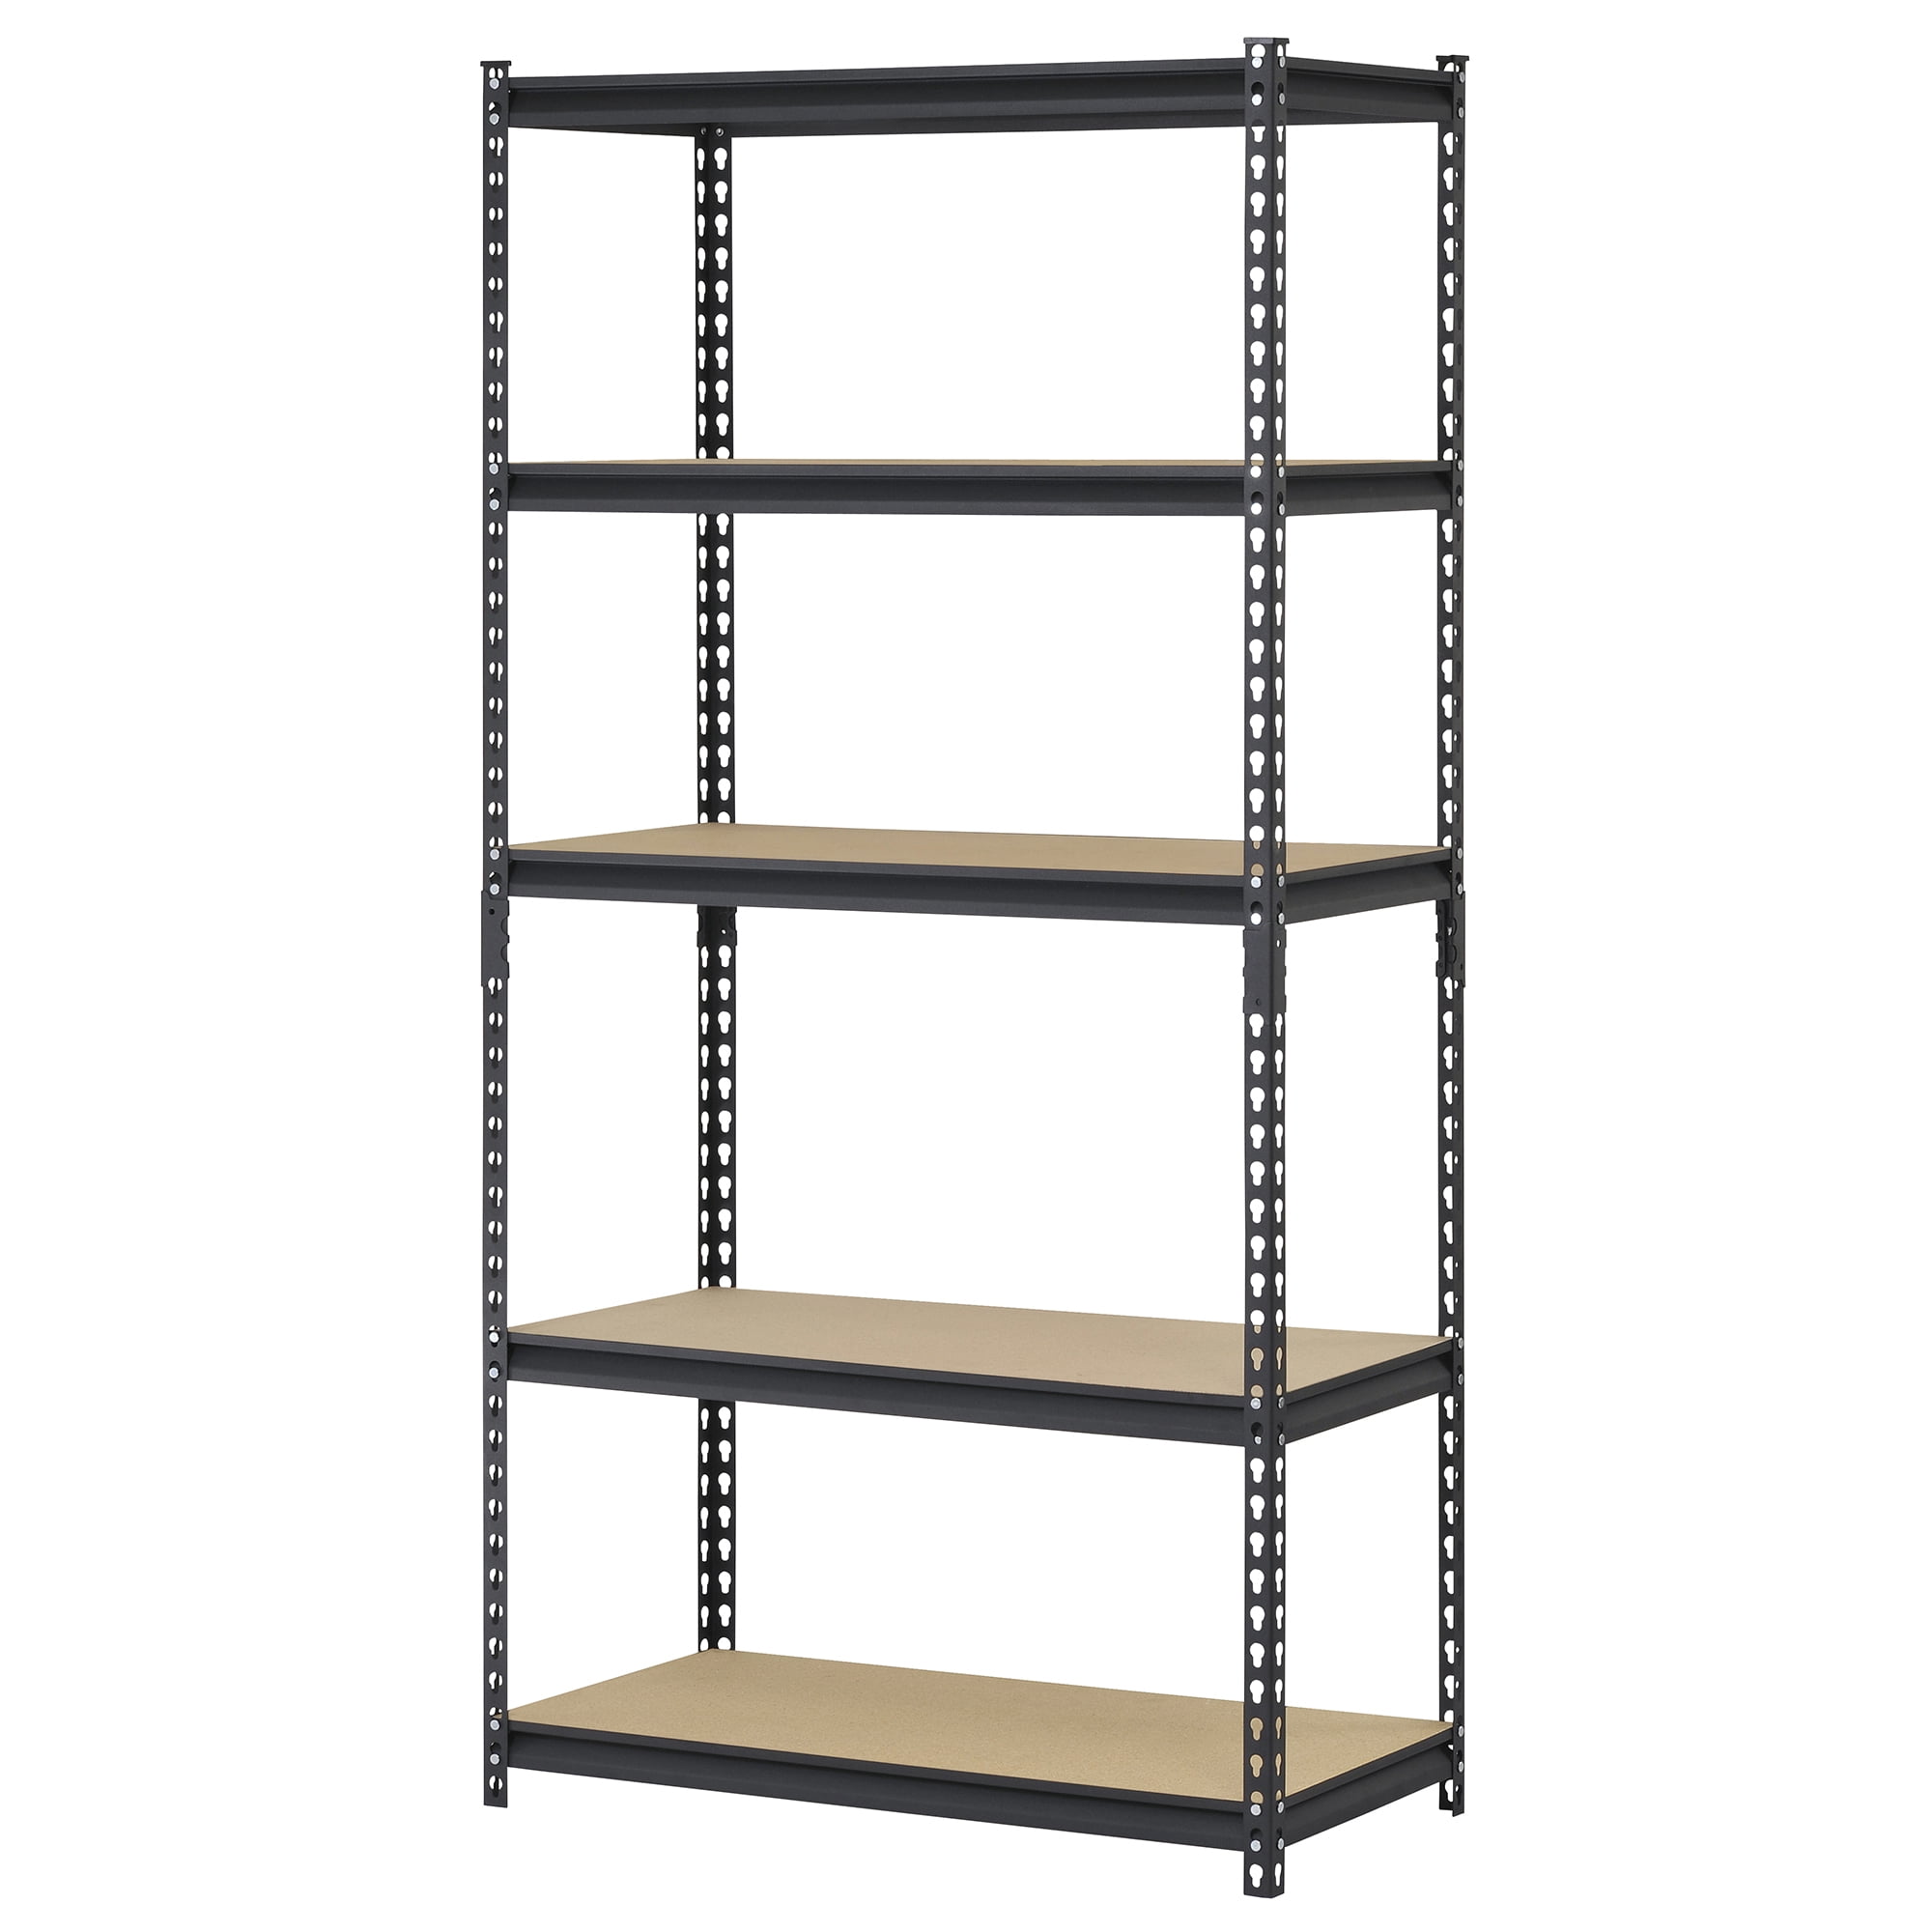 Details about   EDSAL 1VG32 S24-5 Additional Steel Shelf 36" W 24" D Qty 5 